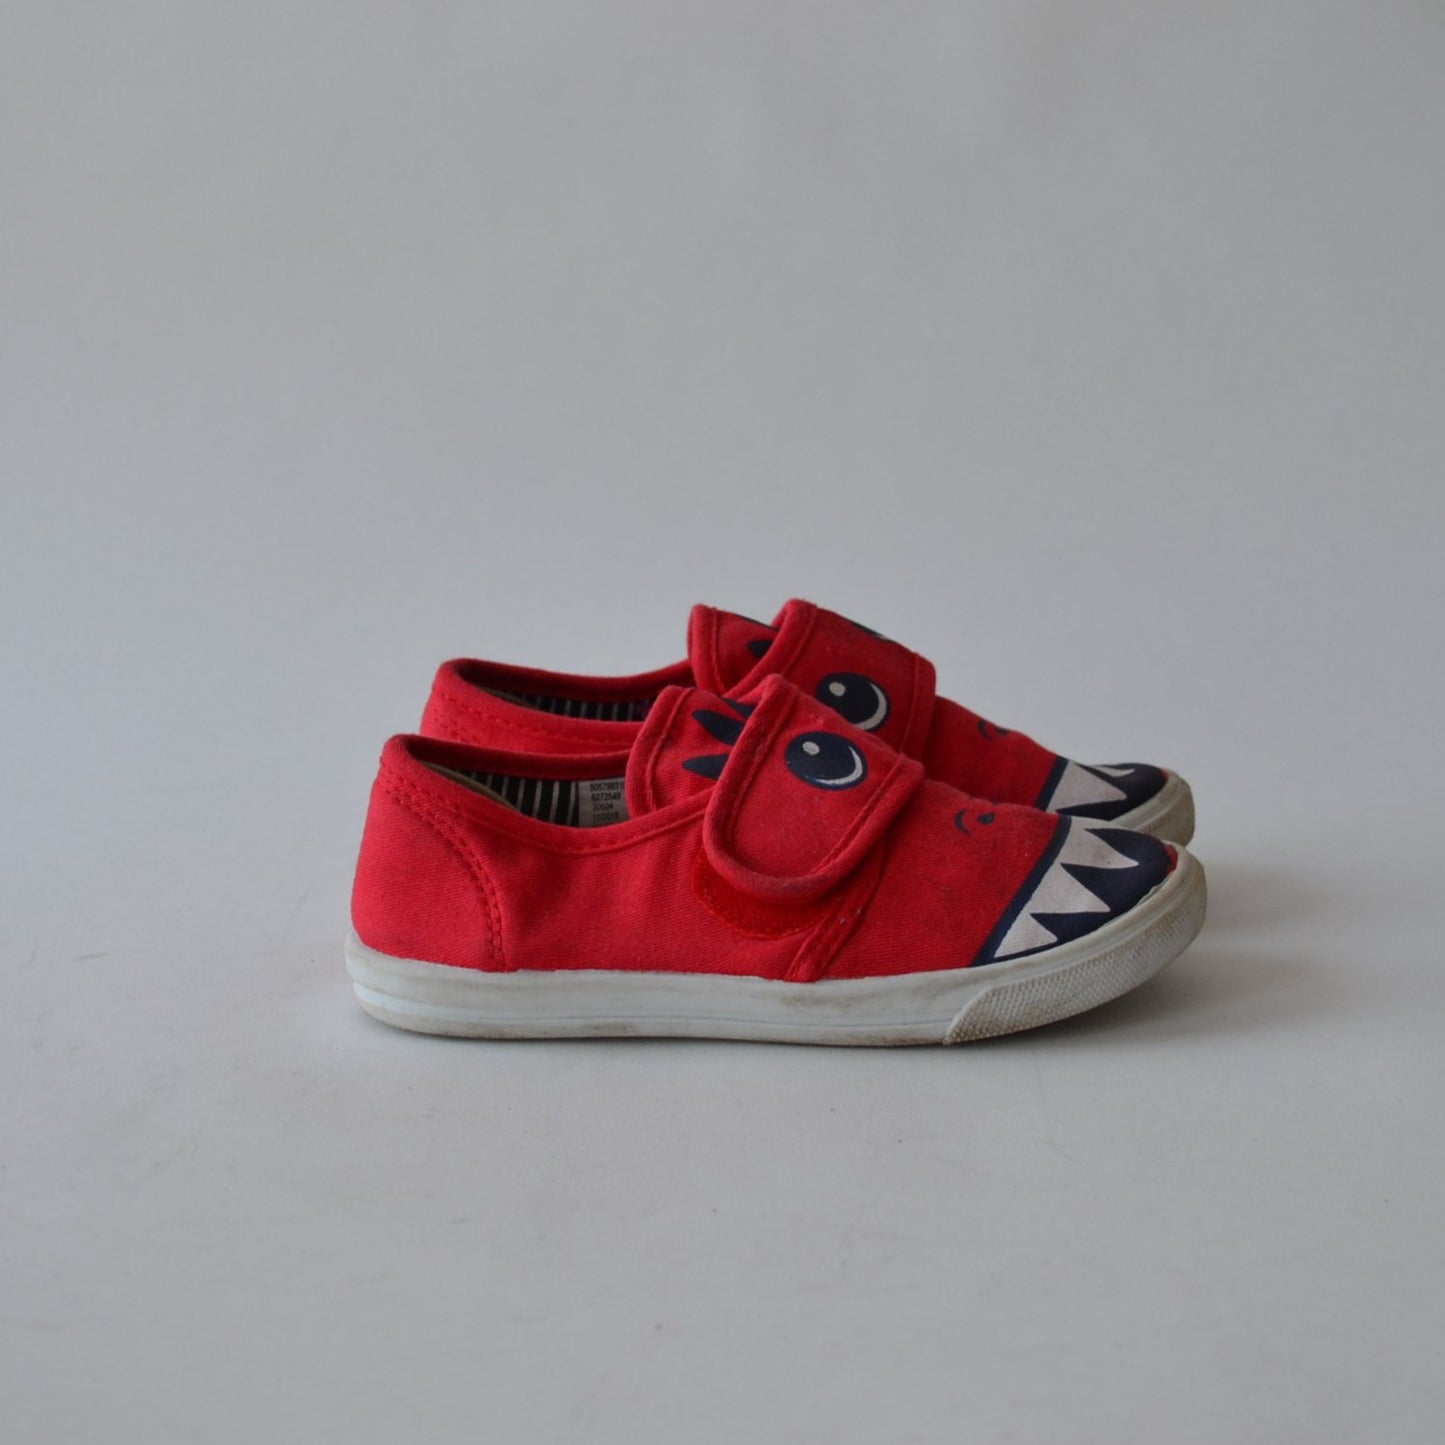 Red Monster Trainers Shoe Size 11 (jr)